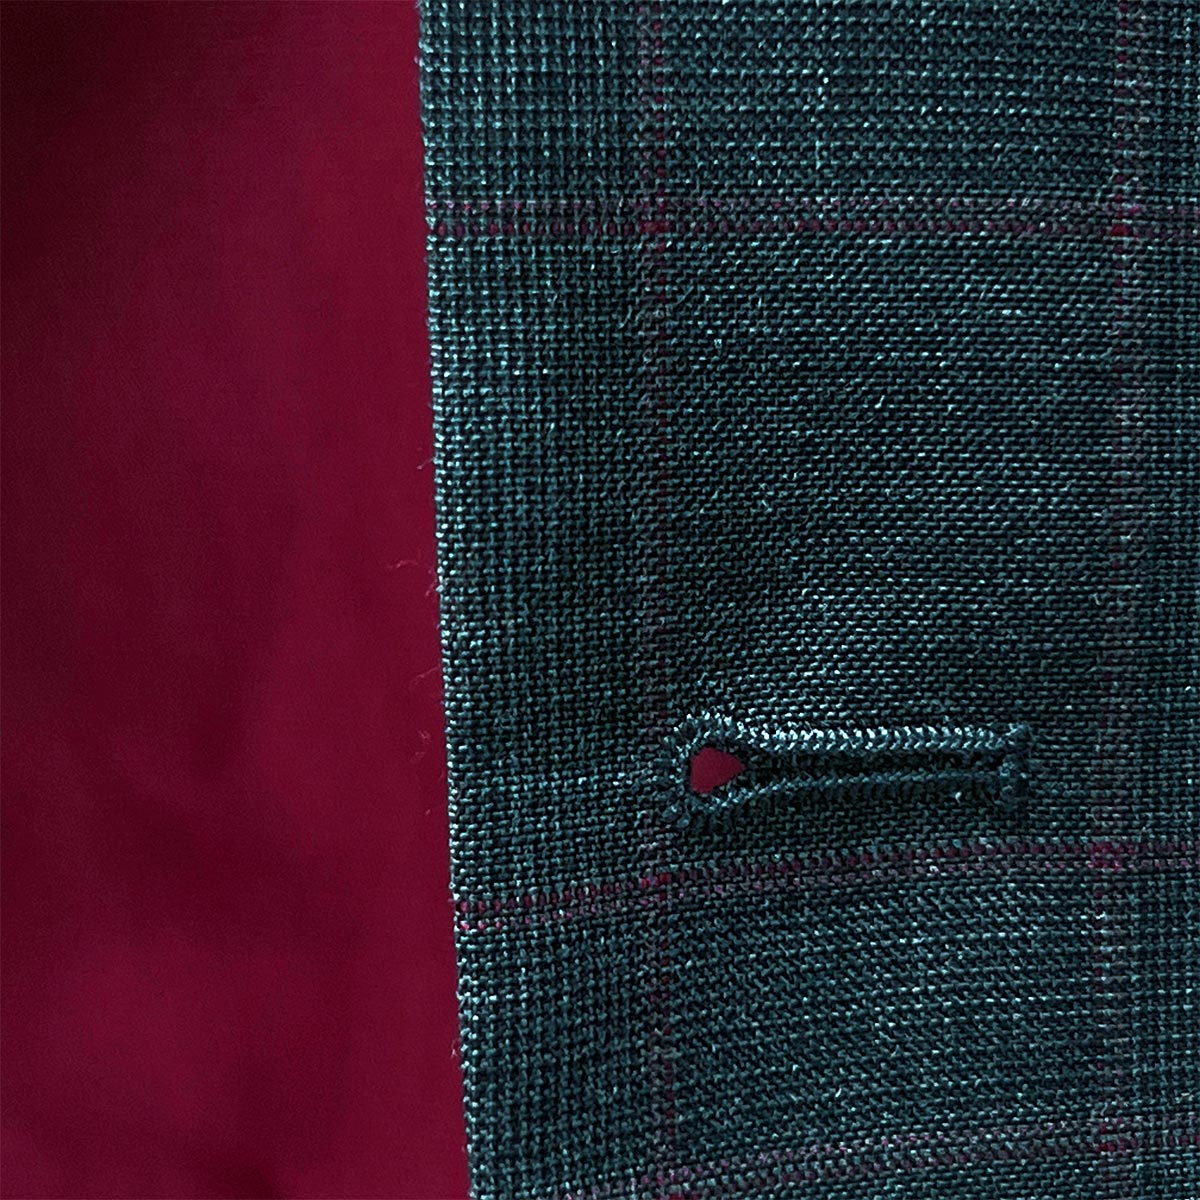 Button detail on a grey windowpane suit, focusing on its high-quality craftsmanship.